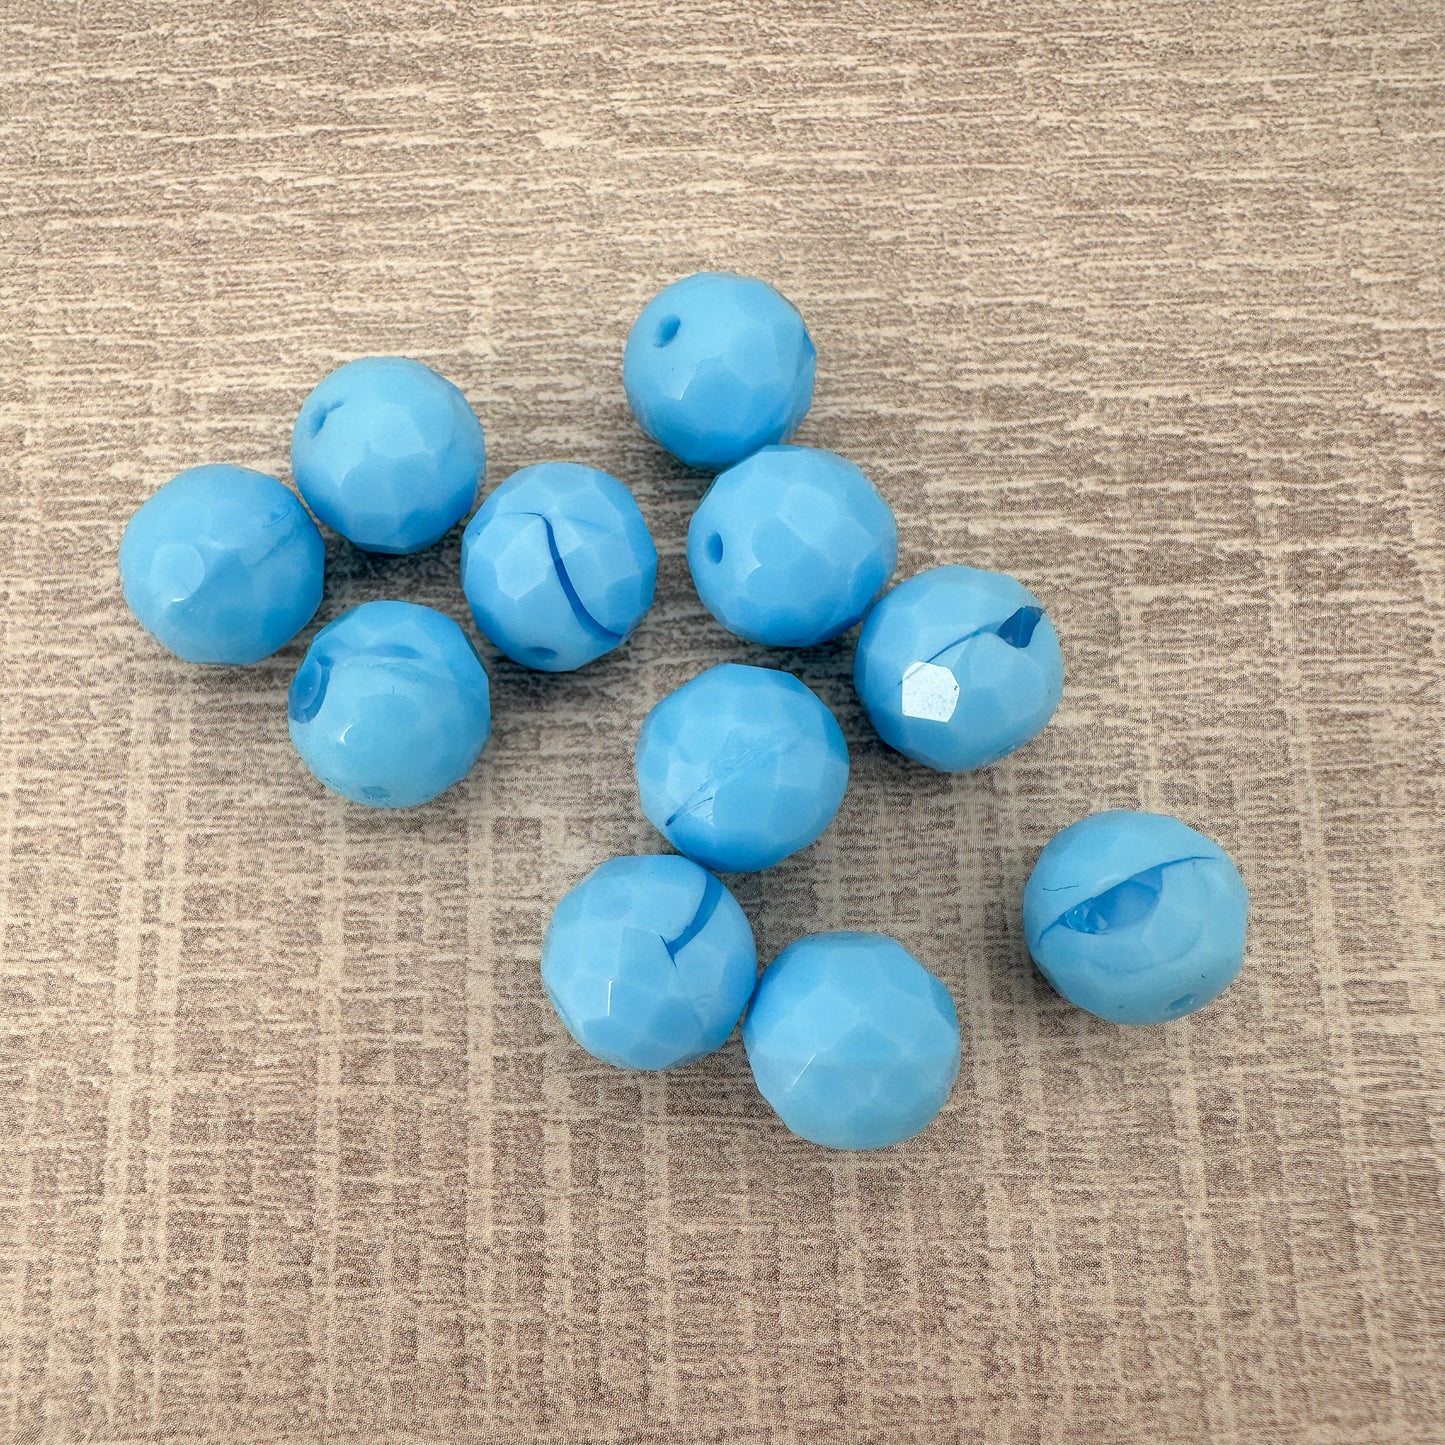 Vintage Czech 12mm Faceted Baby Blue Glass Bead - 1 pc. (Z799)